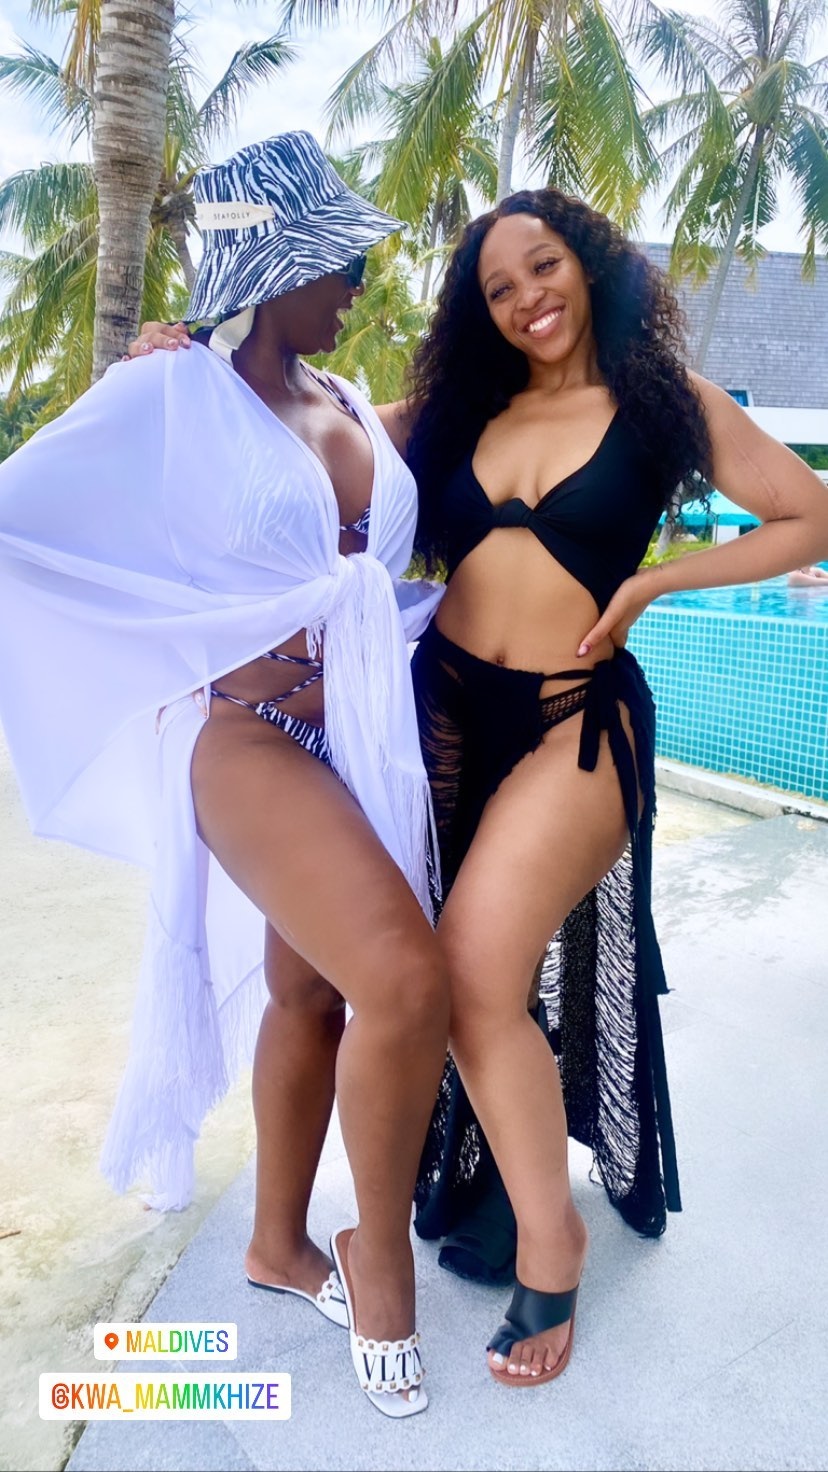 Royal AM owner Ma Mkhize and her daughter Sbahle Mpisane.